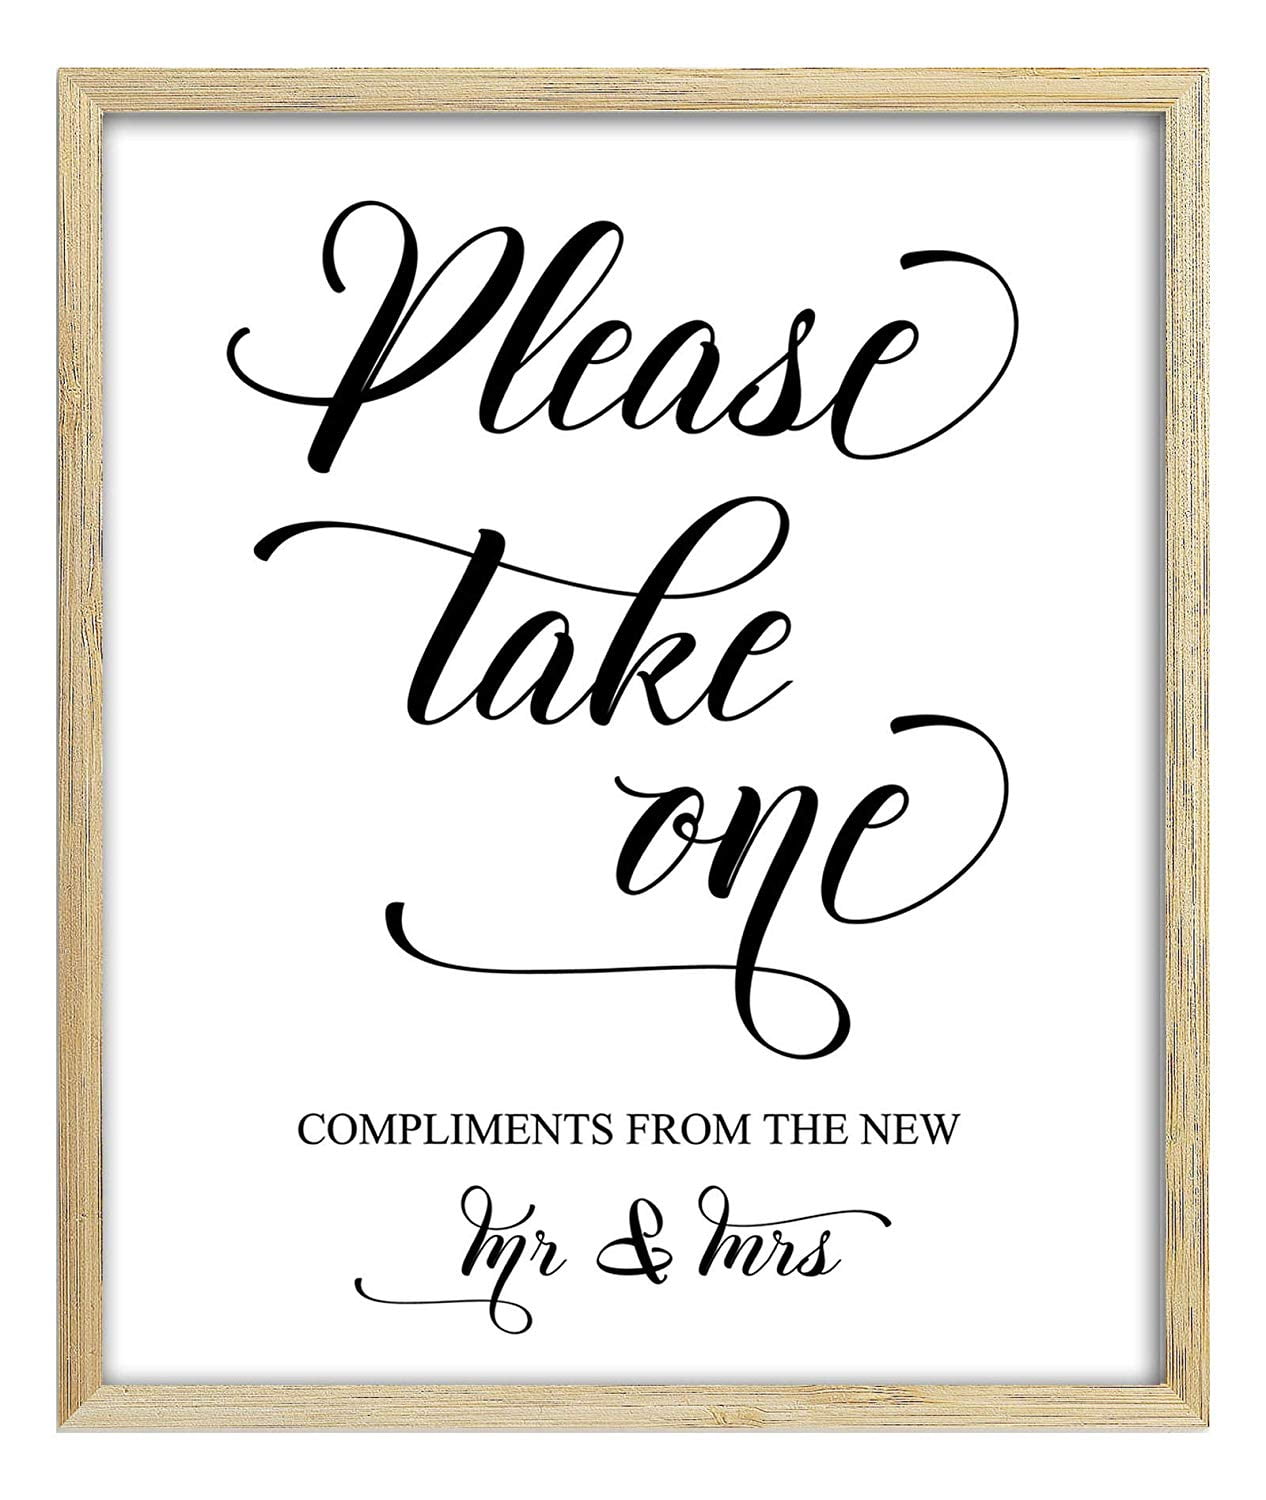 Please Take One Sign, Wedding Favors Sign, Party Print, Compliments From  the New Mr. & Mrs. Favor Sign Party Decor 